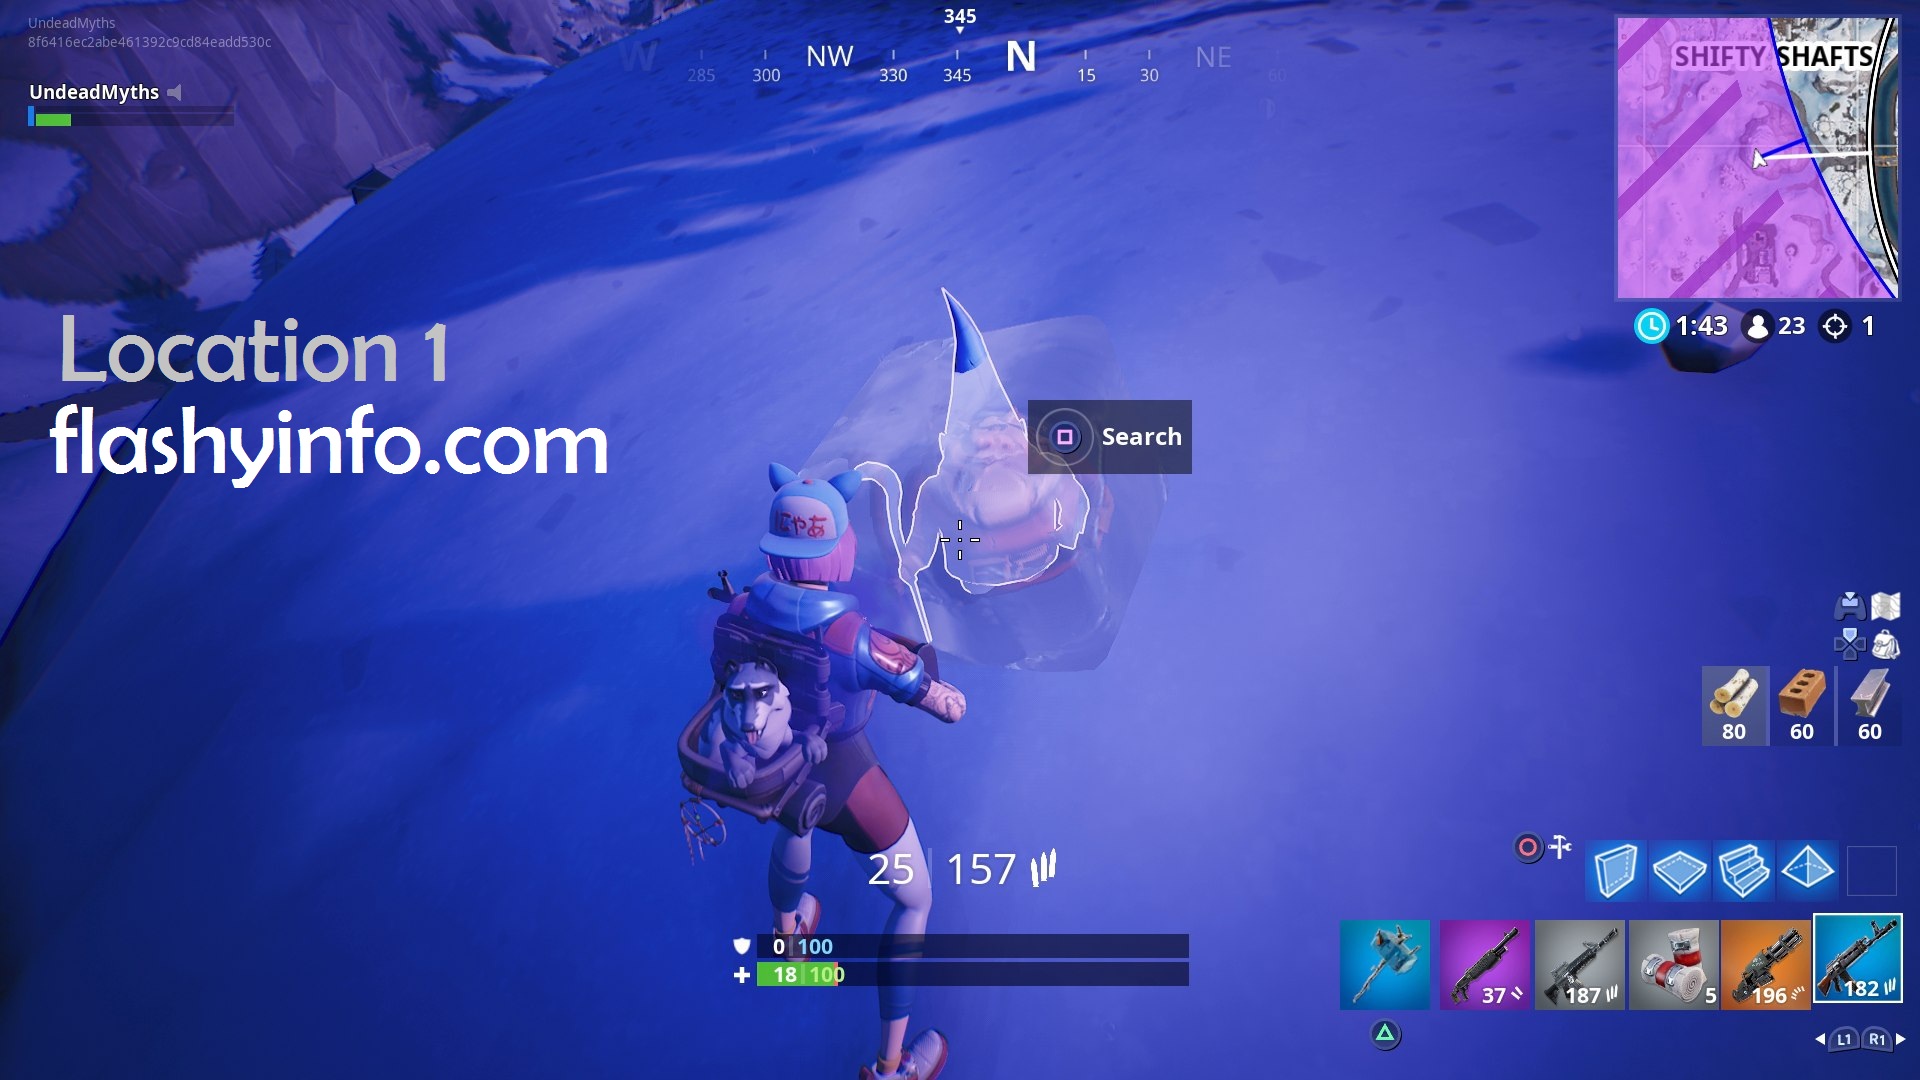 Fortnite Chilly Gnomes Location 1